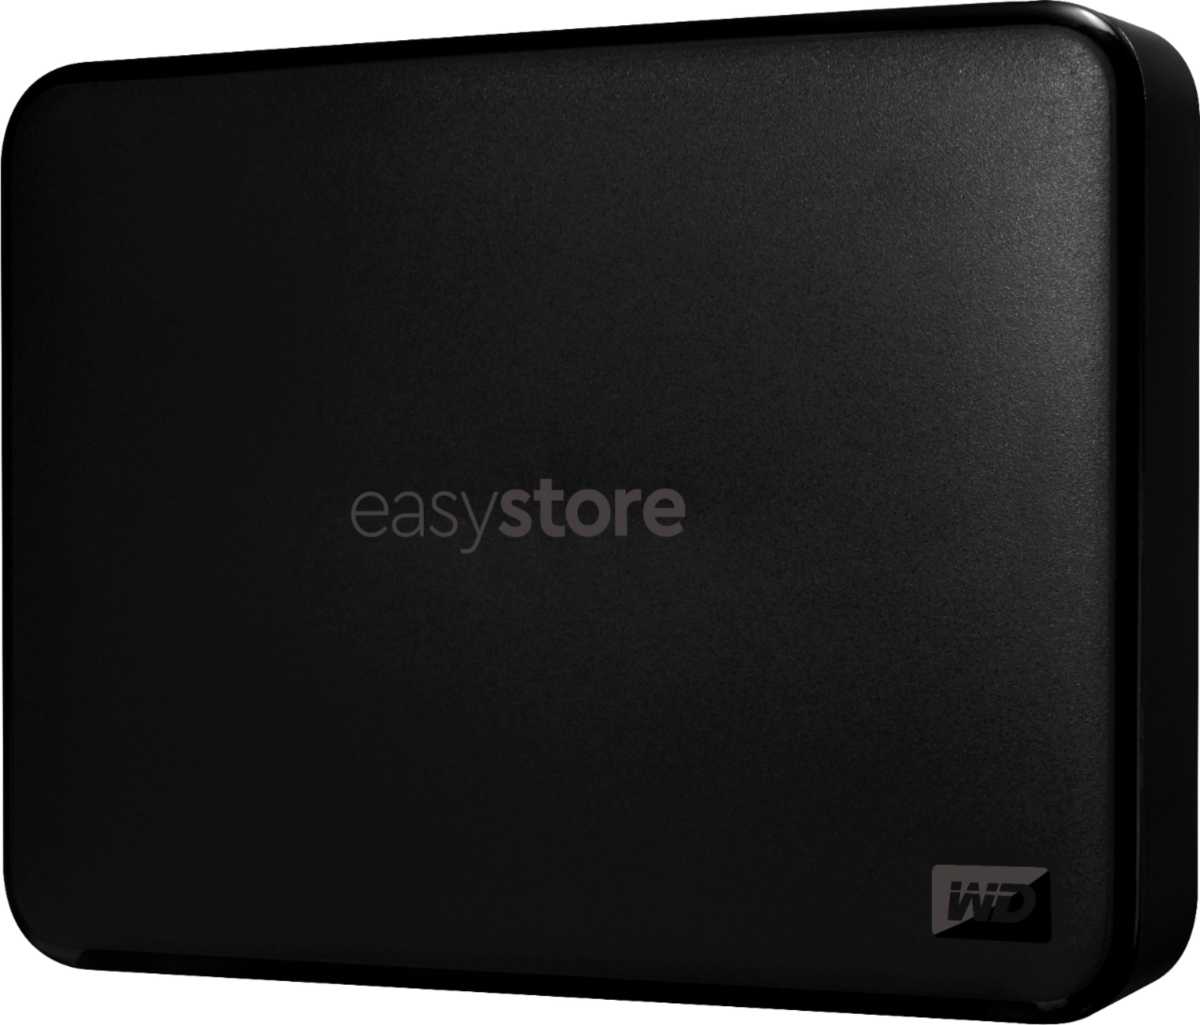 WD easystore portable hard disk drive